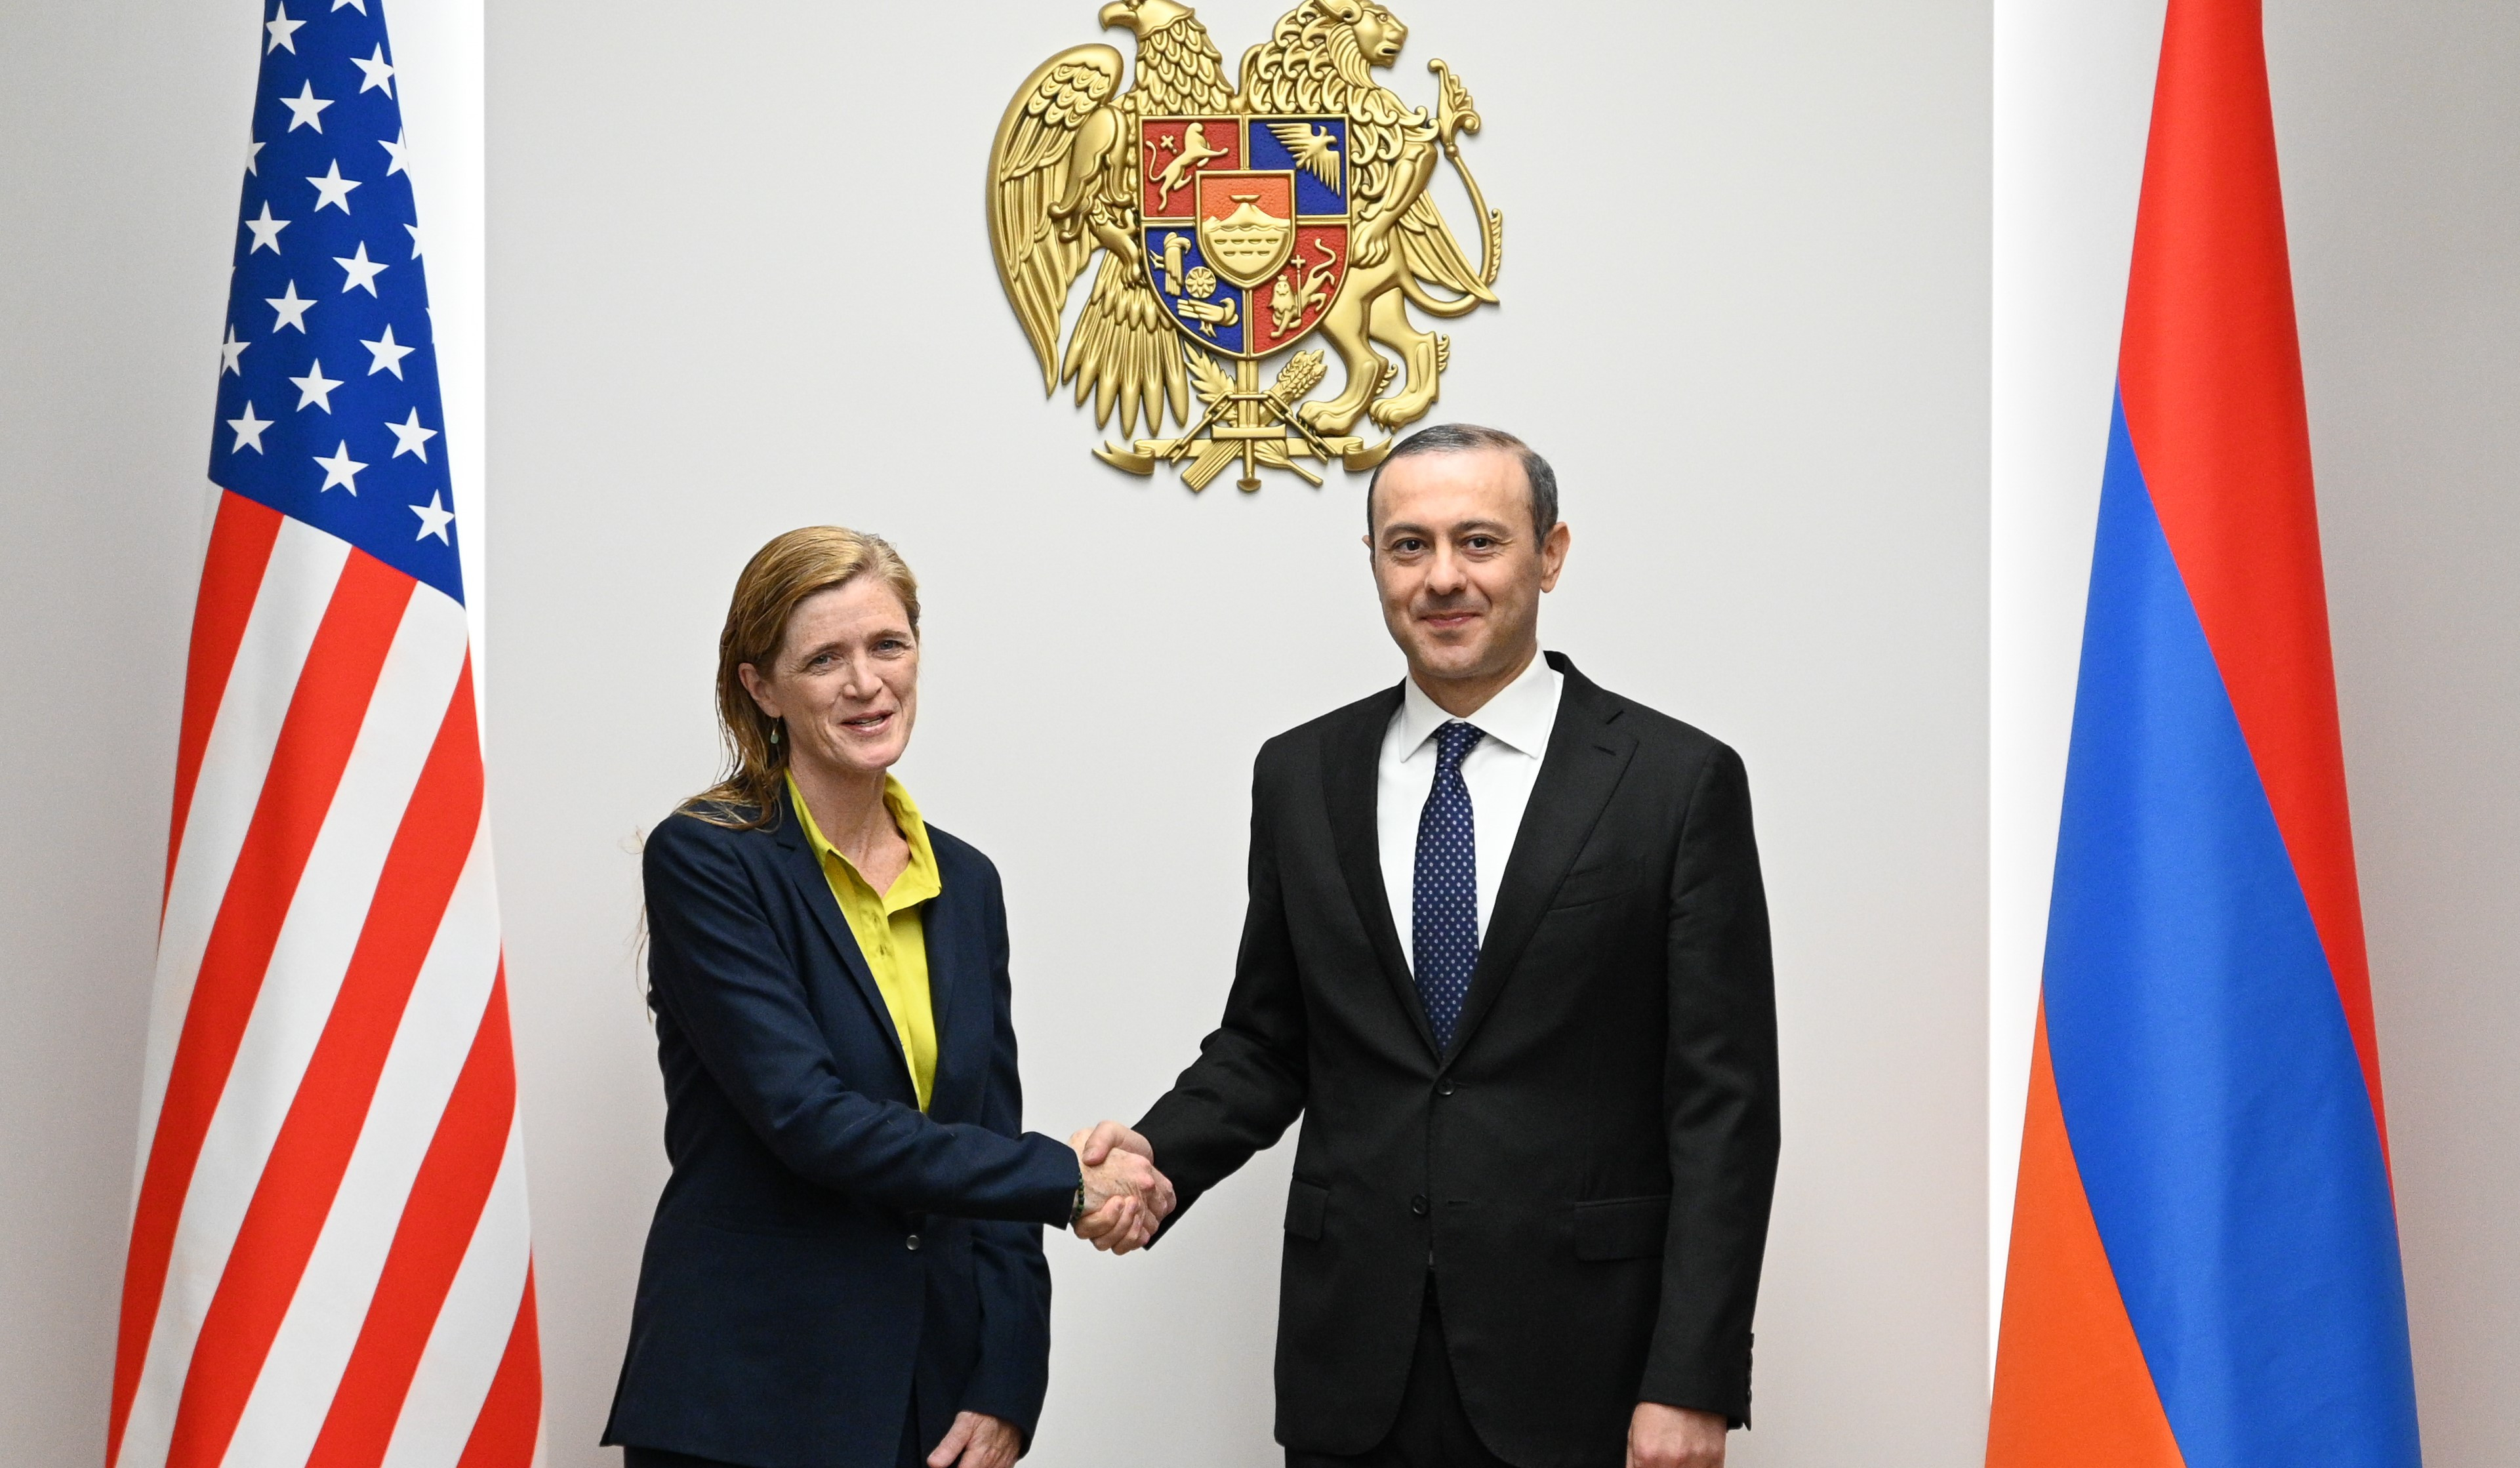 Armen Grigoryan and Samantha Power discussed prospects of 'Crossroads of Peace' implementation